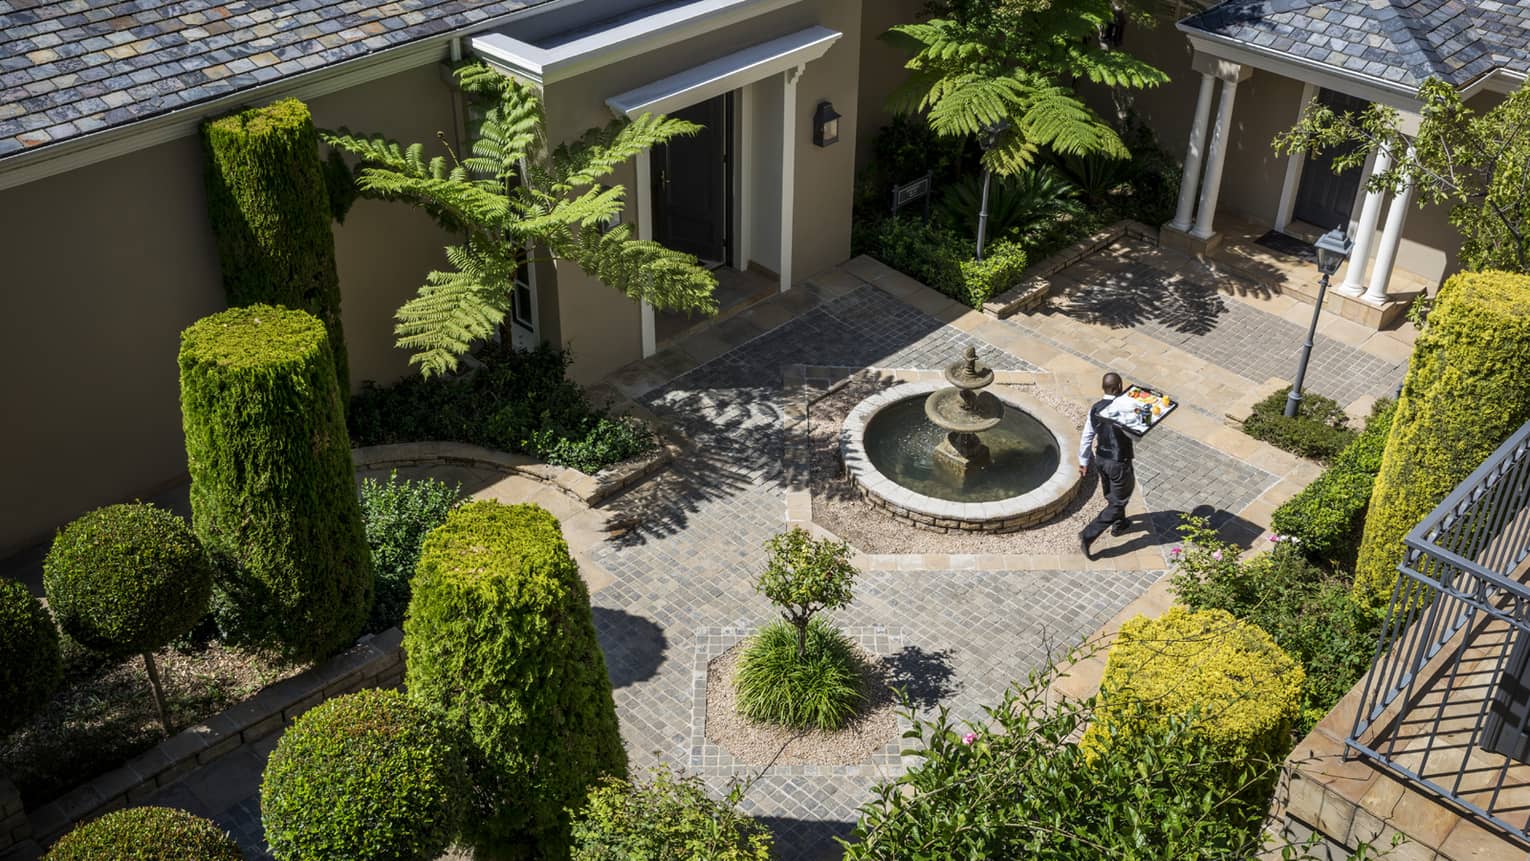 Aerial view of waiter carrying tray through brick courtyard with manicured green shrubs